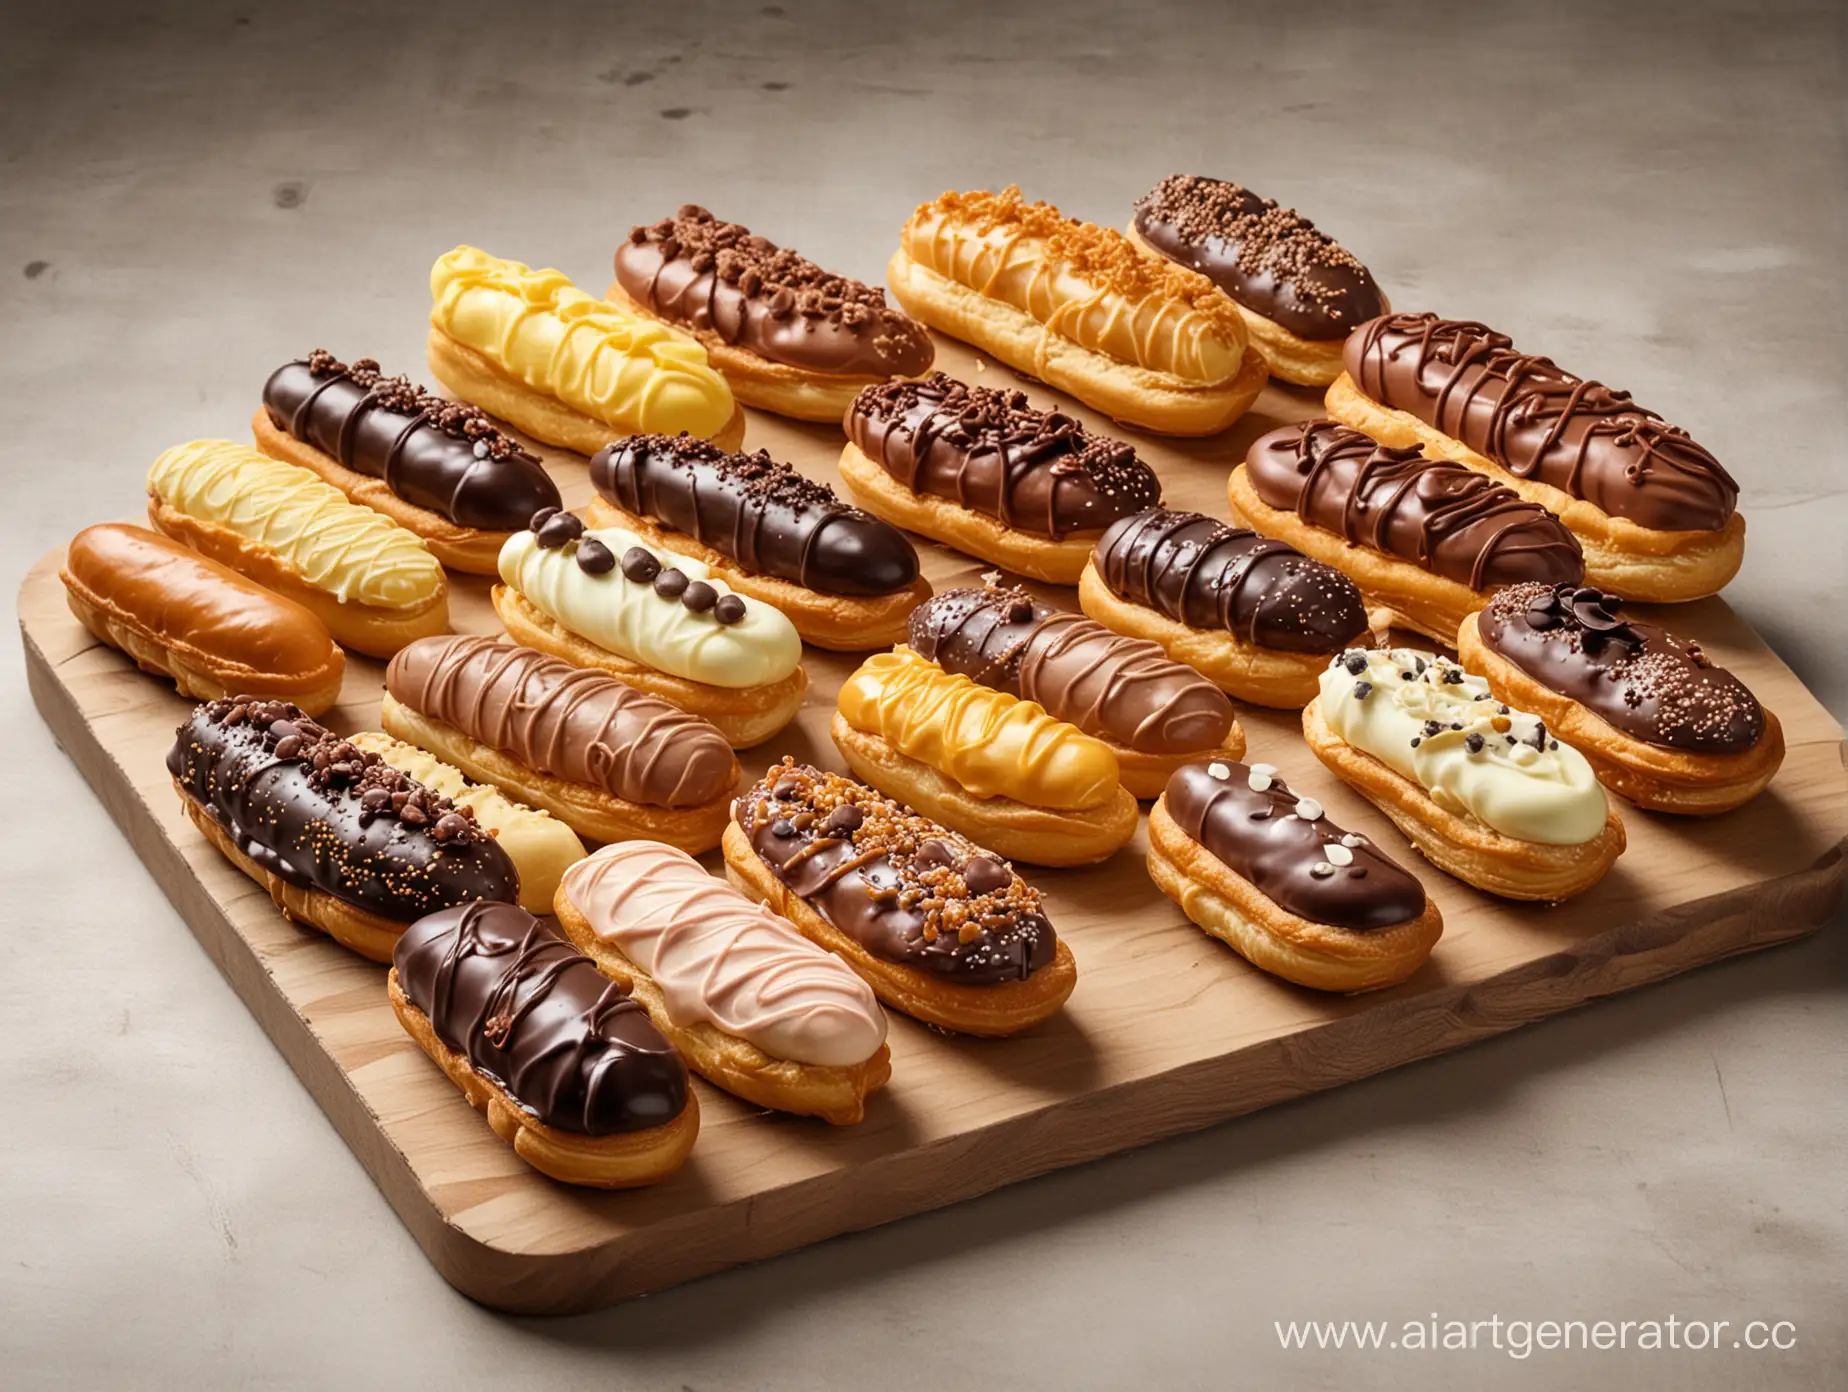 Delicious-Assorted-Eclairs-on-Display-Tempting-French-Pastry-Treats